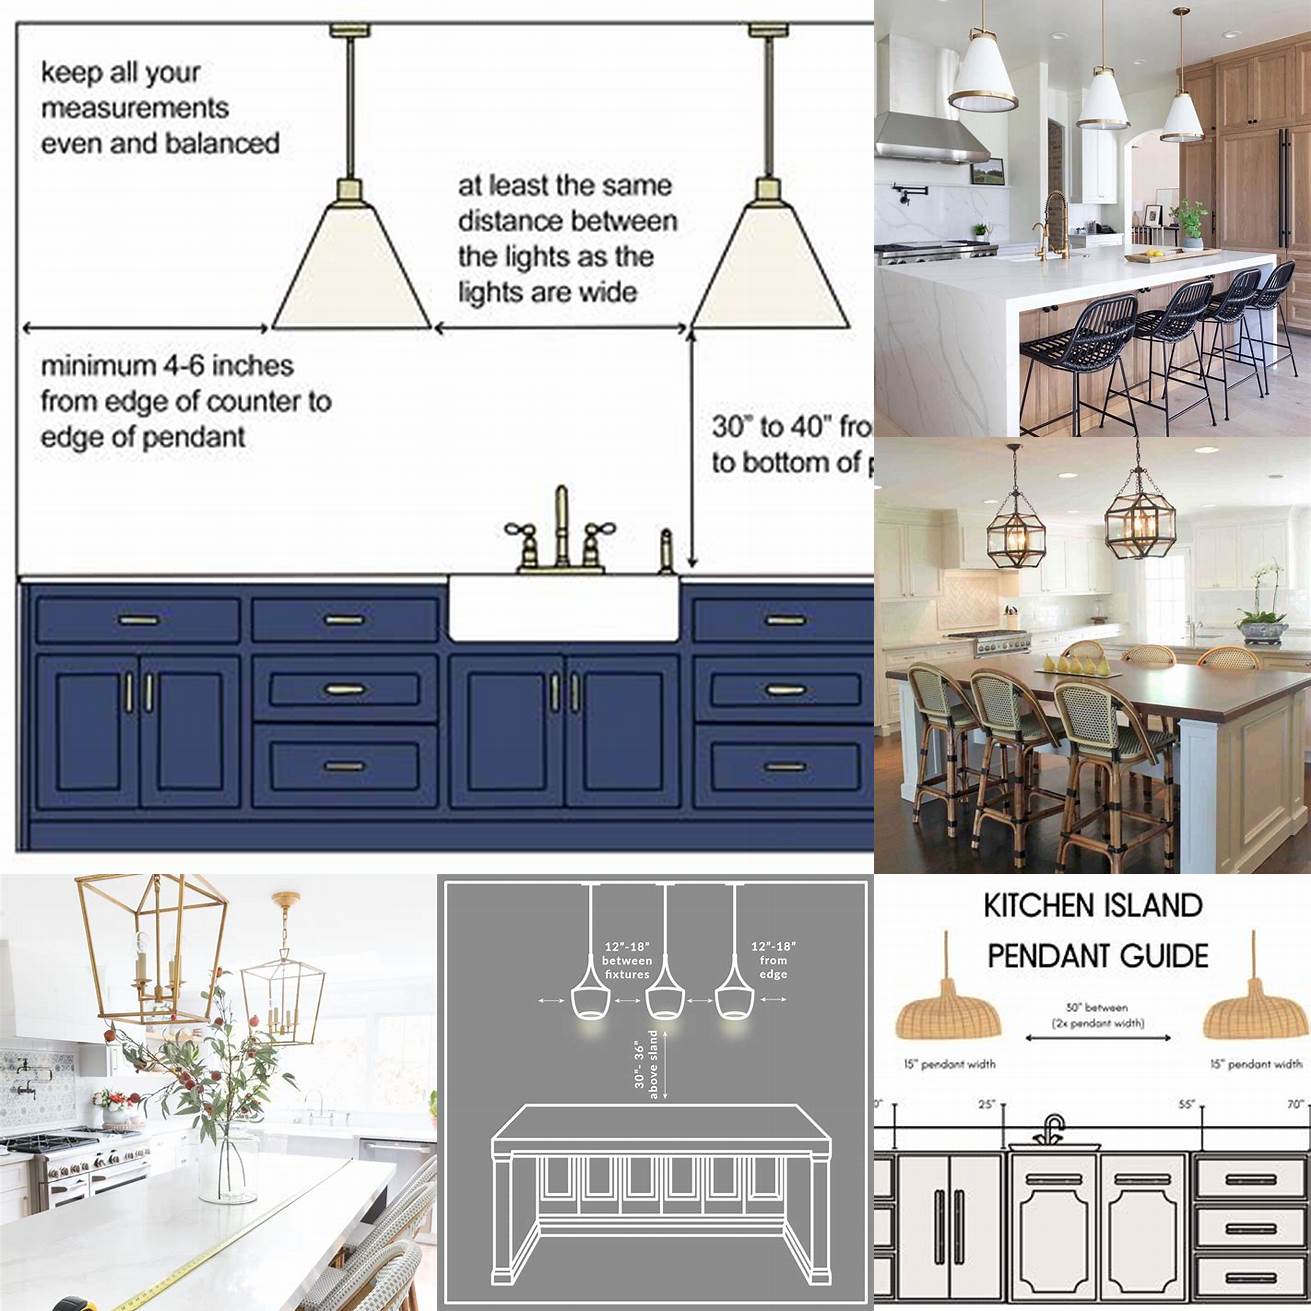 Consider the size and shape of your kitchen island when choosing the size and number of lights